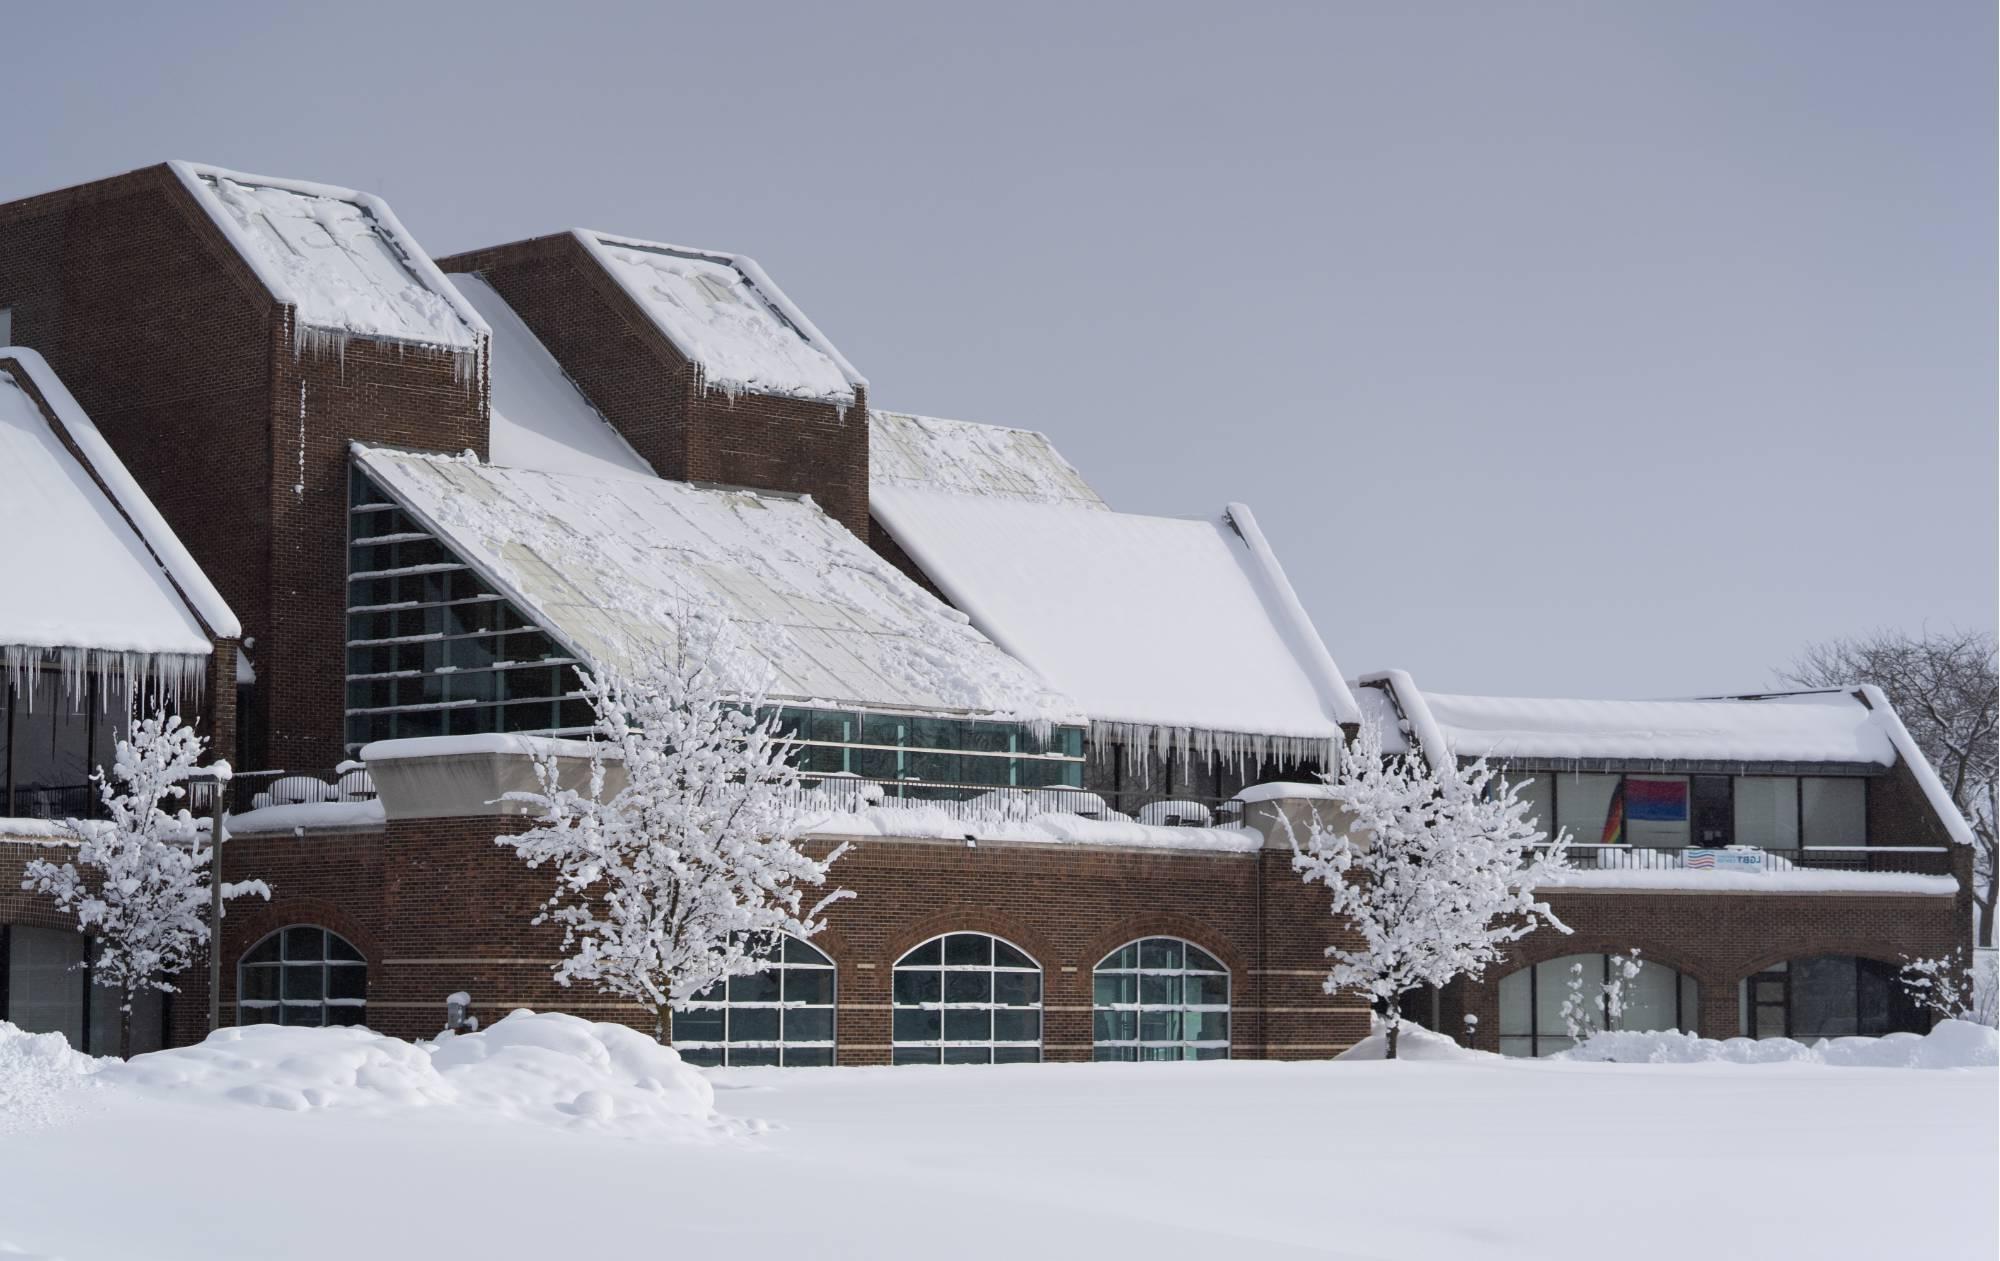 The Kirkhof Center on GVSU's Allendale Campus in the winter with snow on the ground